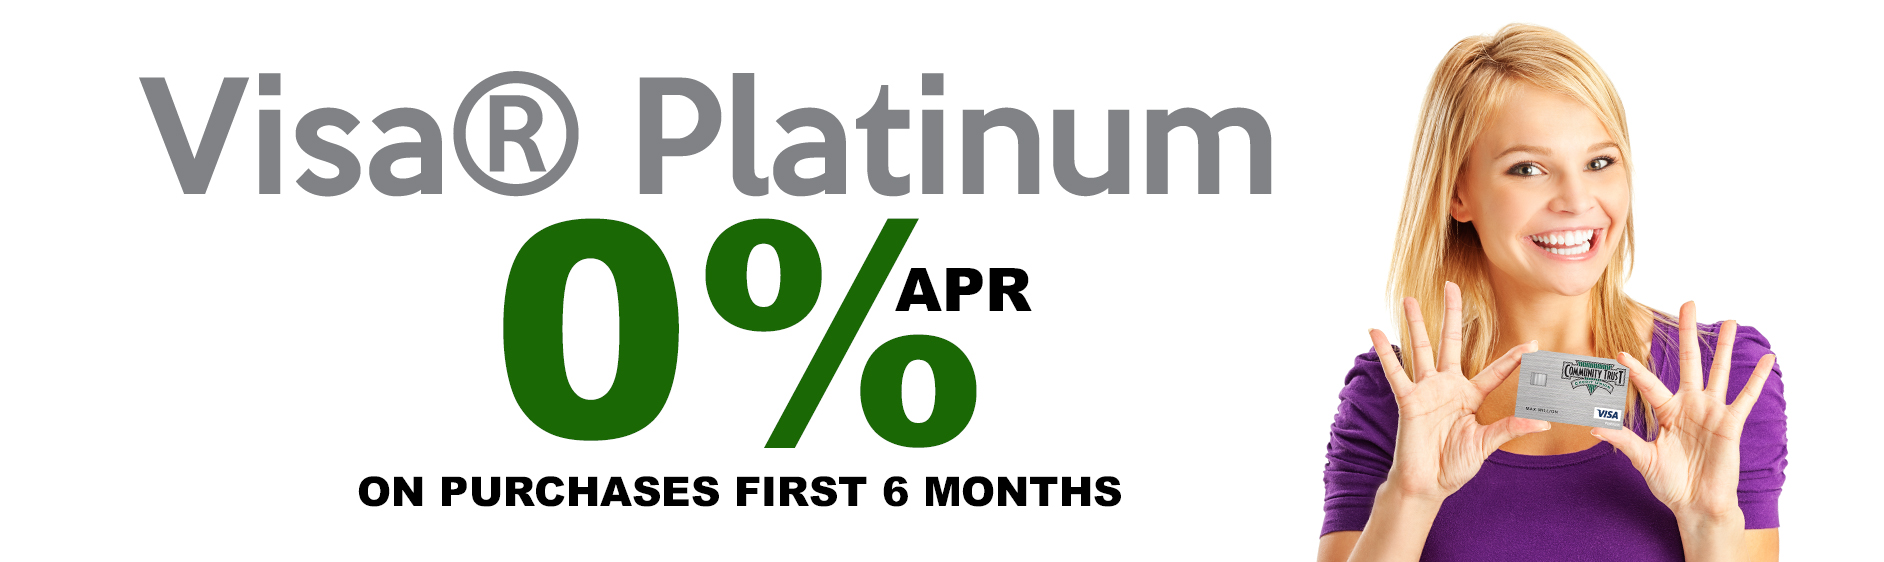 Visa Platinum 0% APR on purchases first 6 months